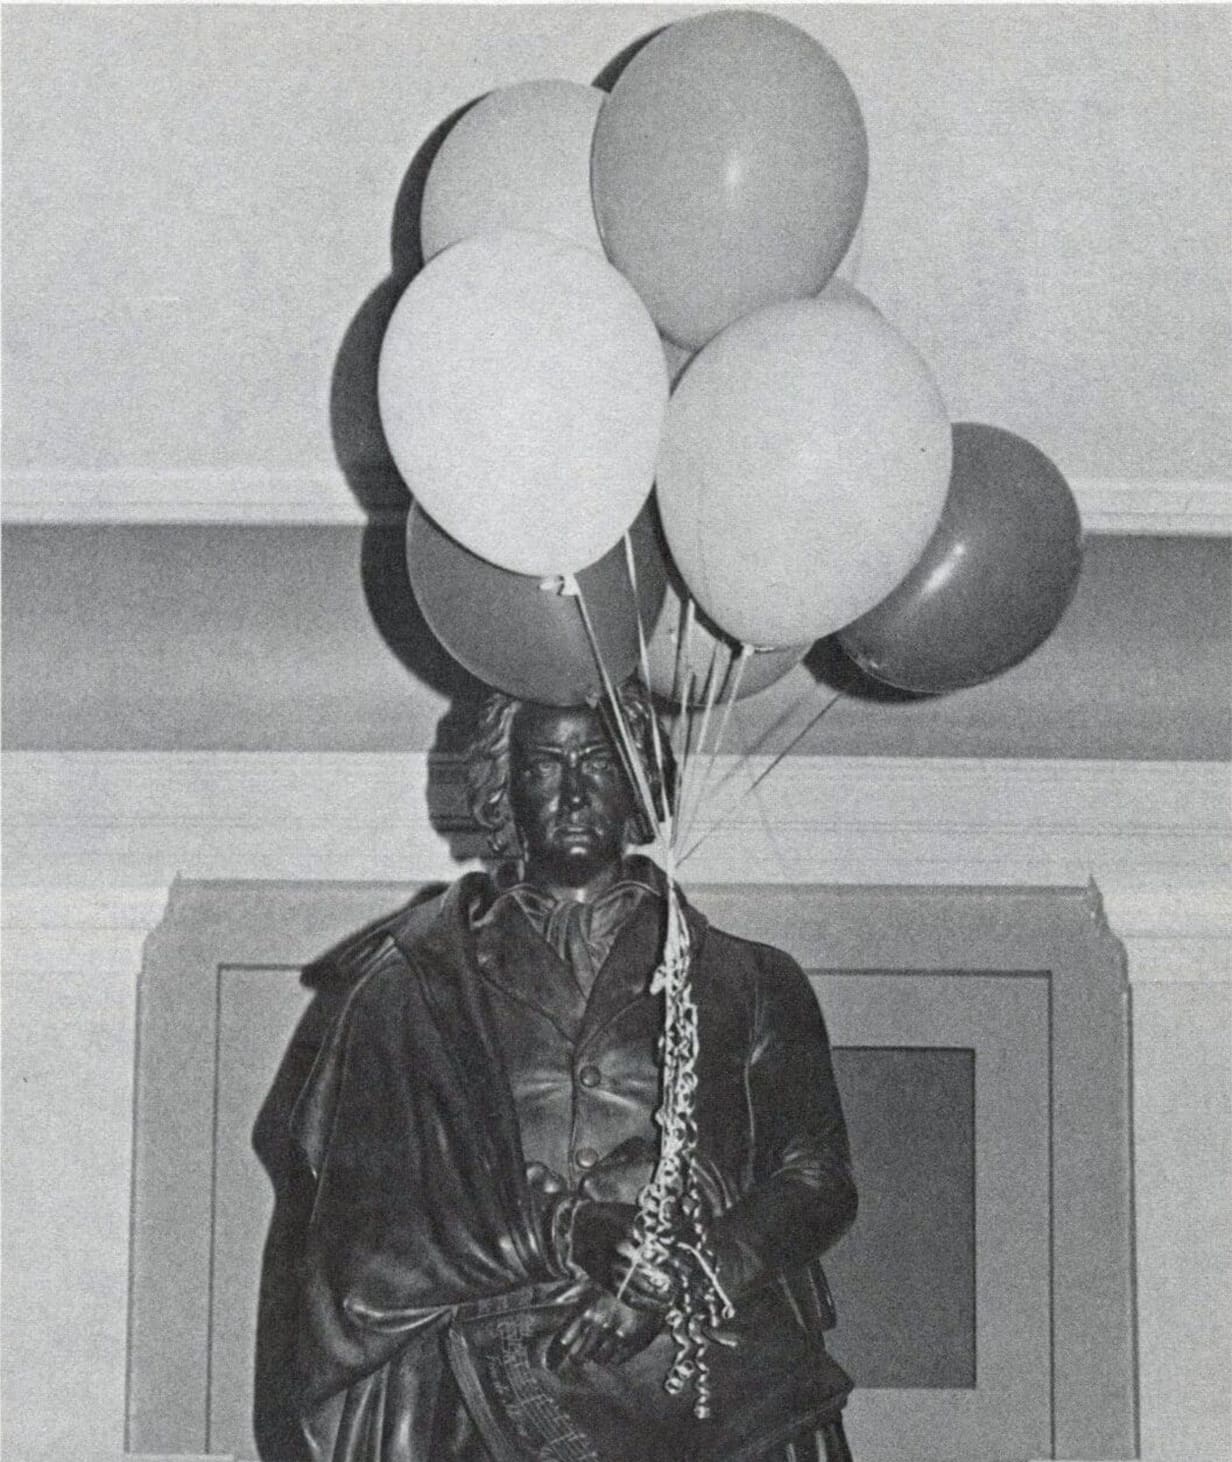 Beethoven Statue with Balloons